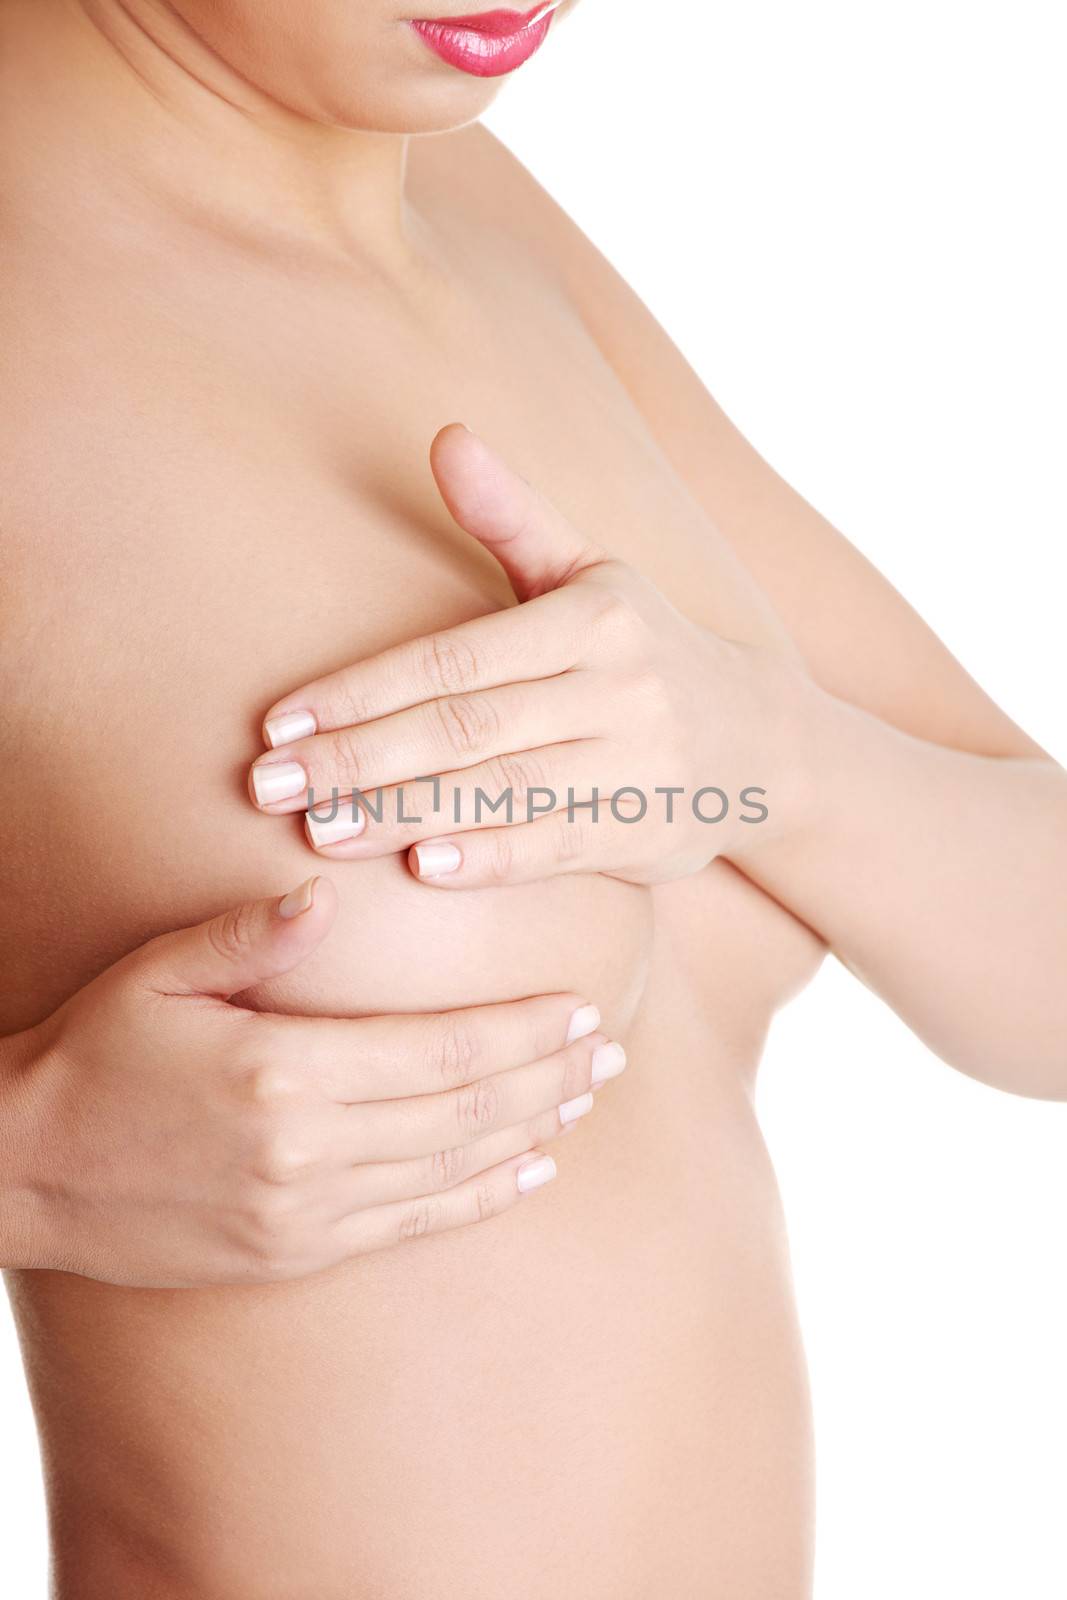 Woman examining breast mastopathy or cancer. by BDS